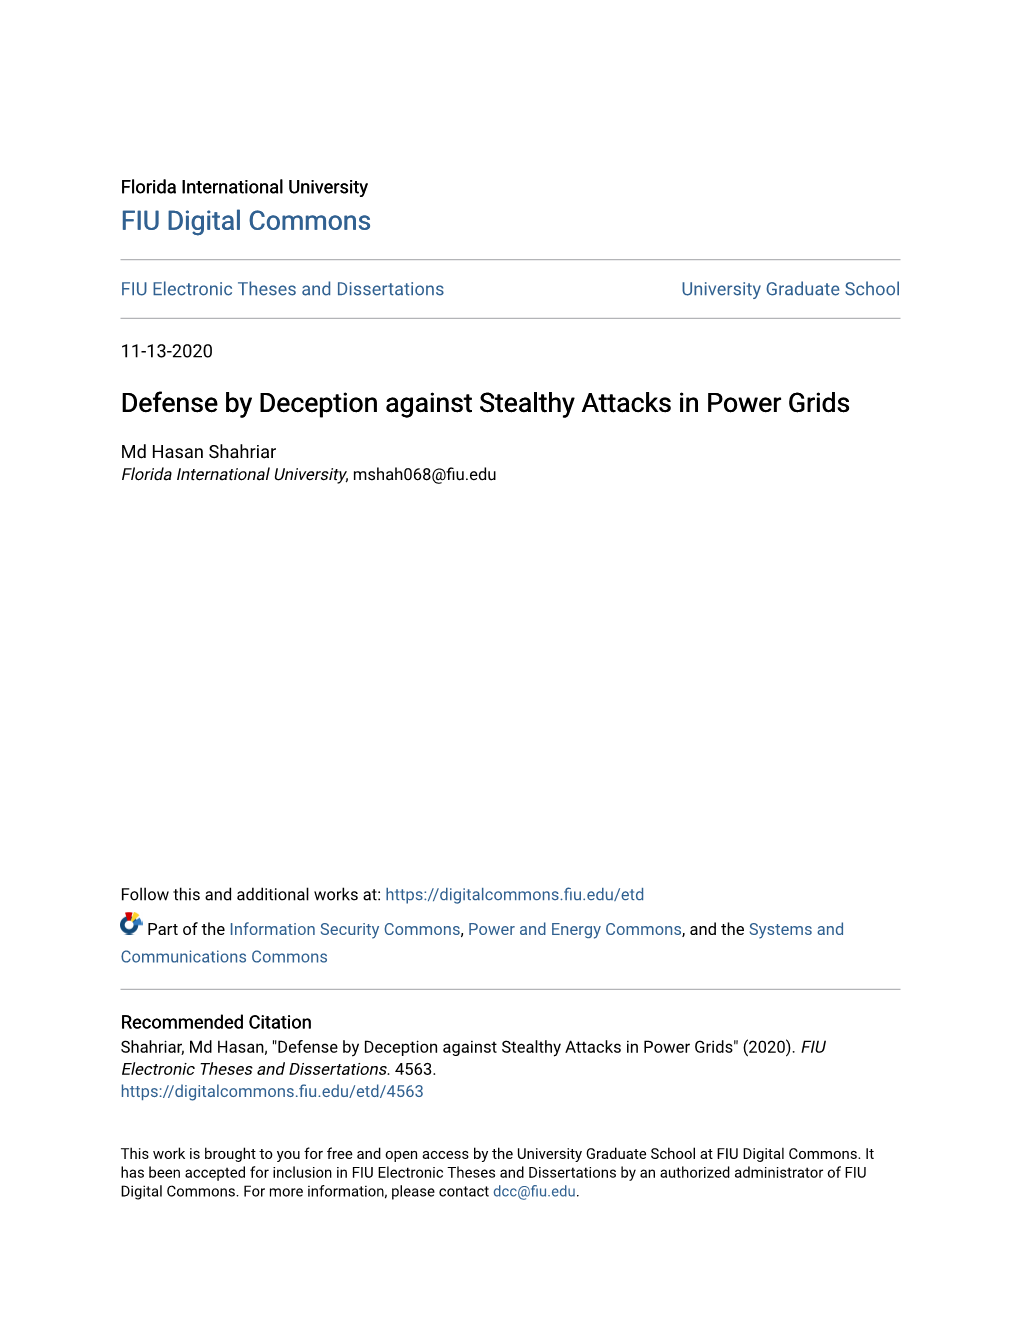 Defense by Deception Against Stealthy Attacks in Power Grids